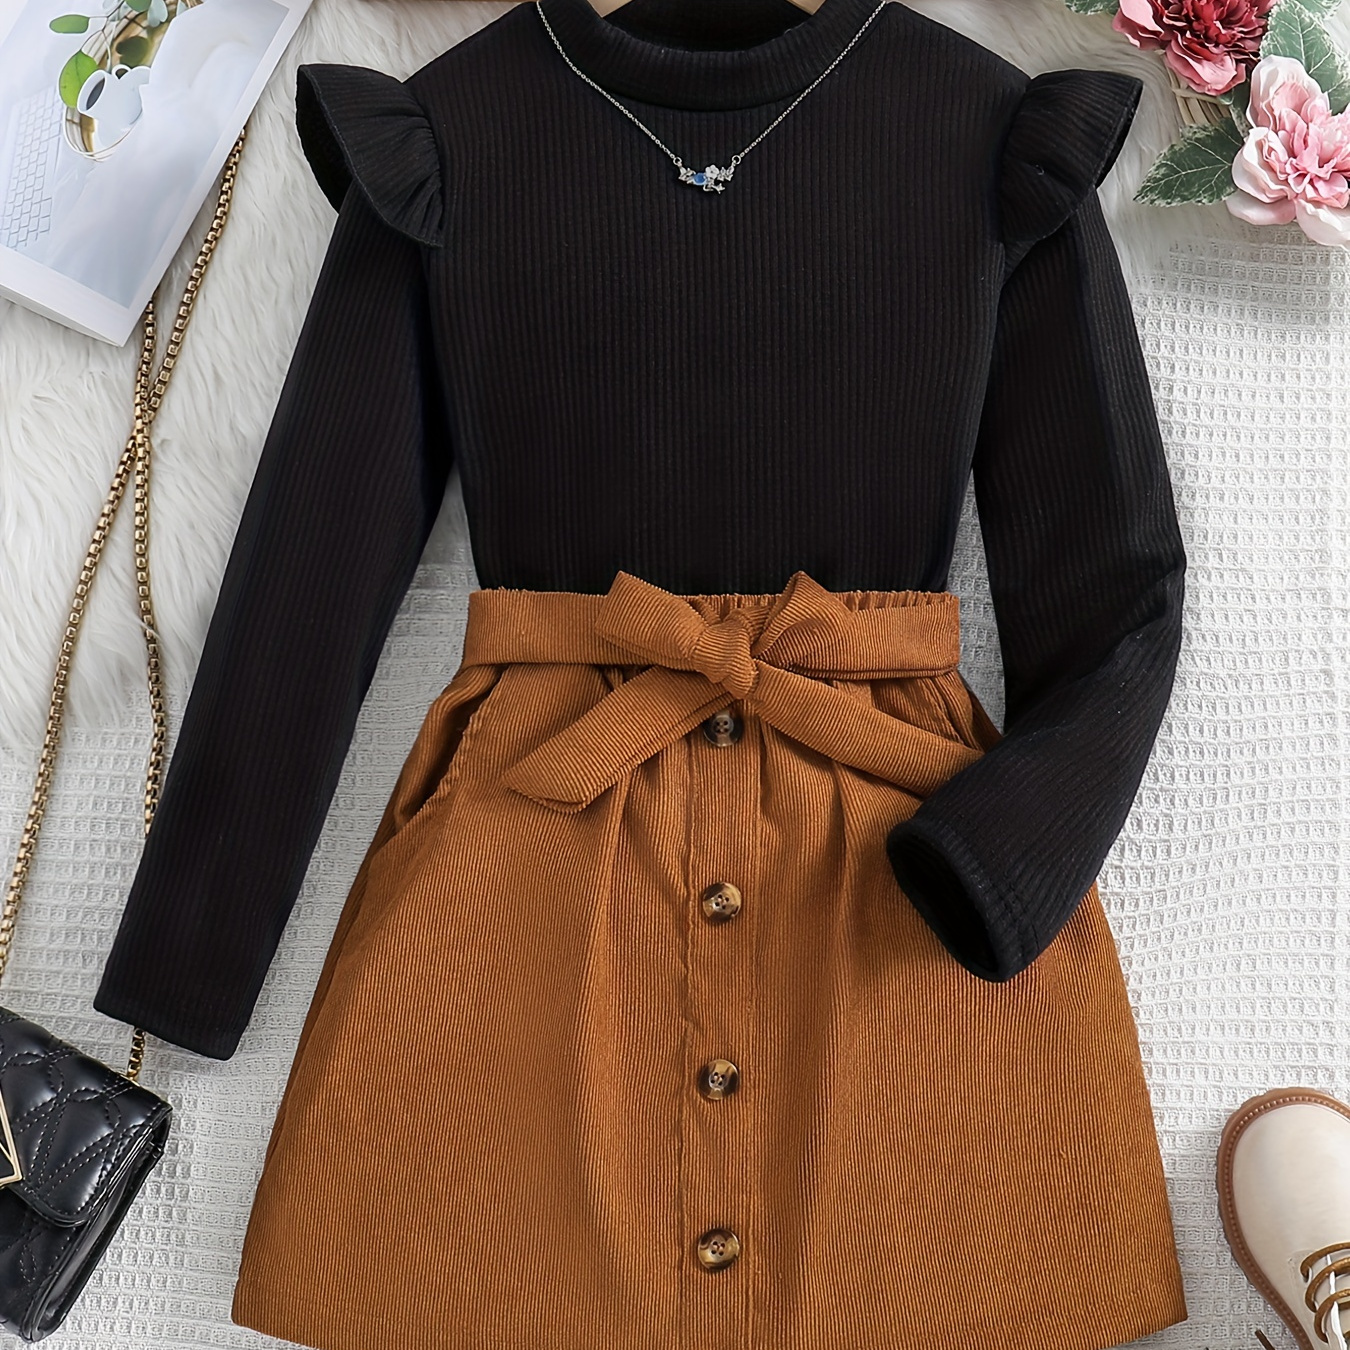 

Girl's Casual 2pcs, Ribbed Long Sleeve Top & Belted Corduroy Skirt Set, Button Decor Outfits, Kids Clothes For Spring Autumn